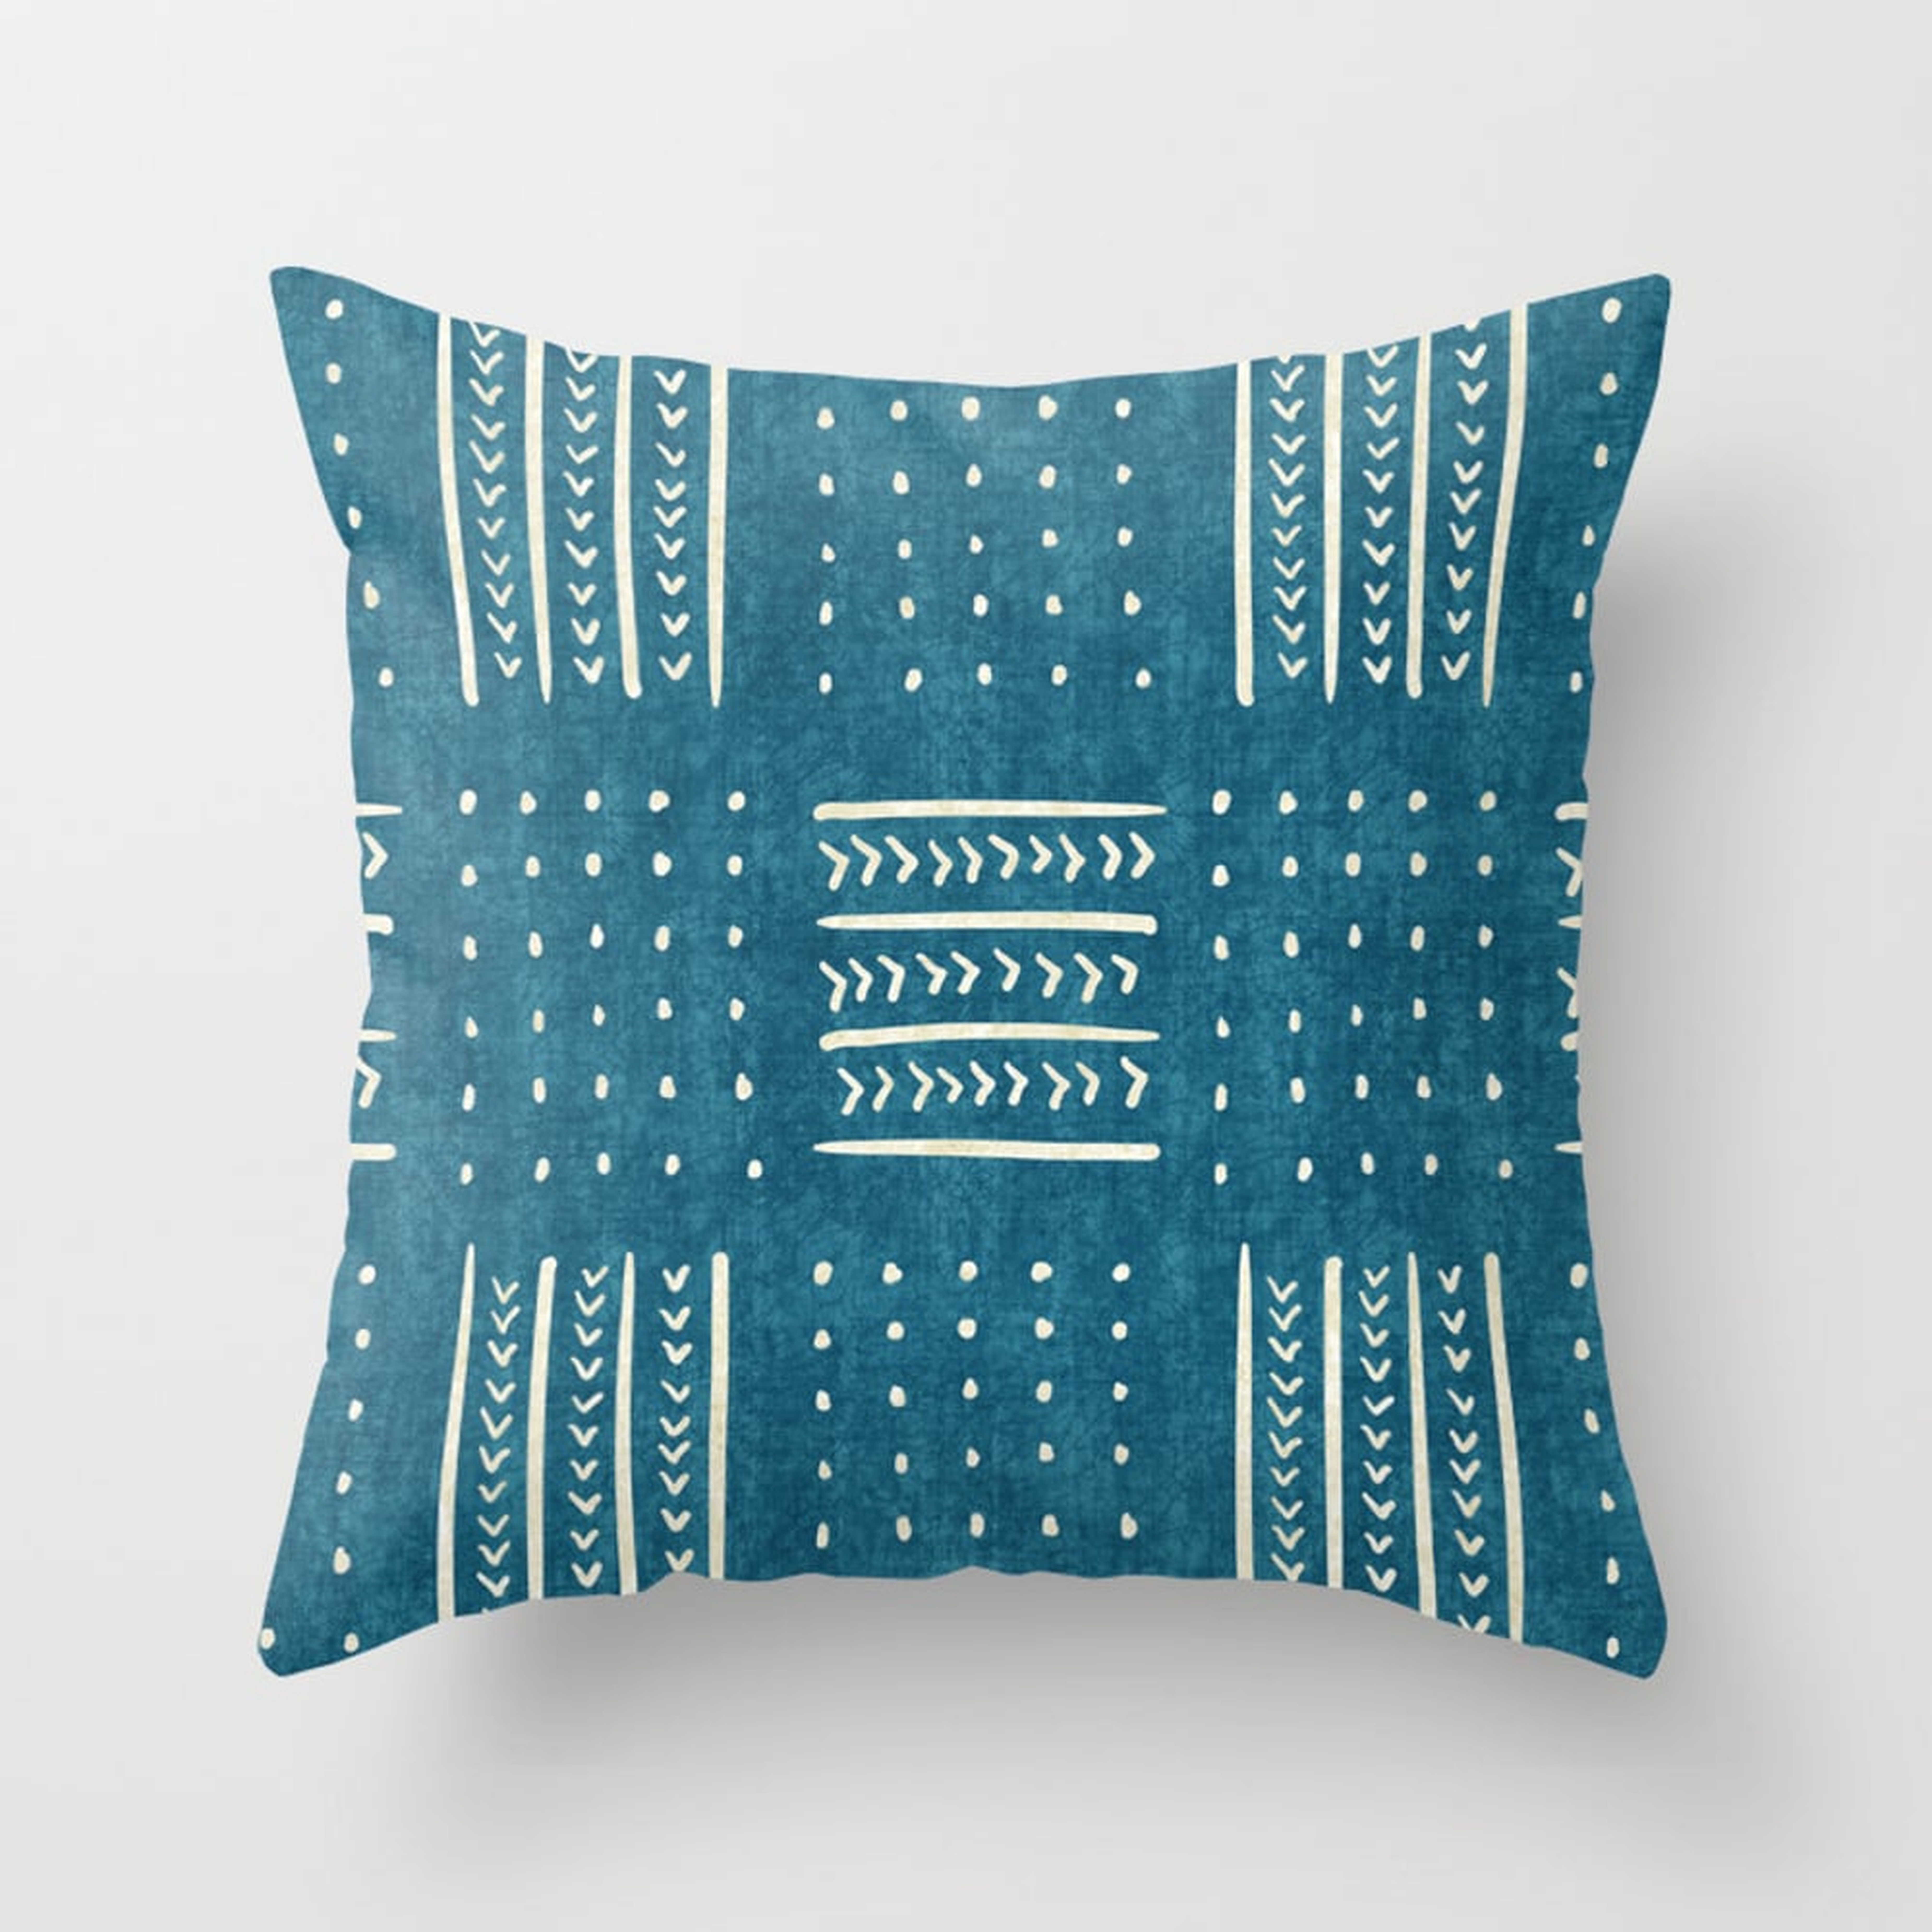 Mud Cloth Patchwork in Teal Throw Pillow - Indoor Cover (20" x 20") with pillow insert by Beckybailey1 - Society6